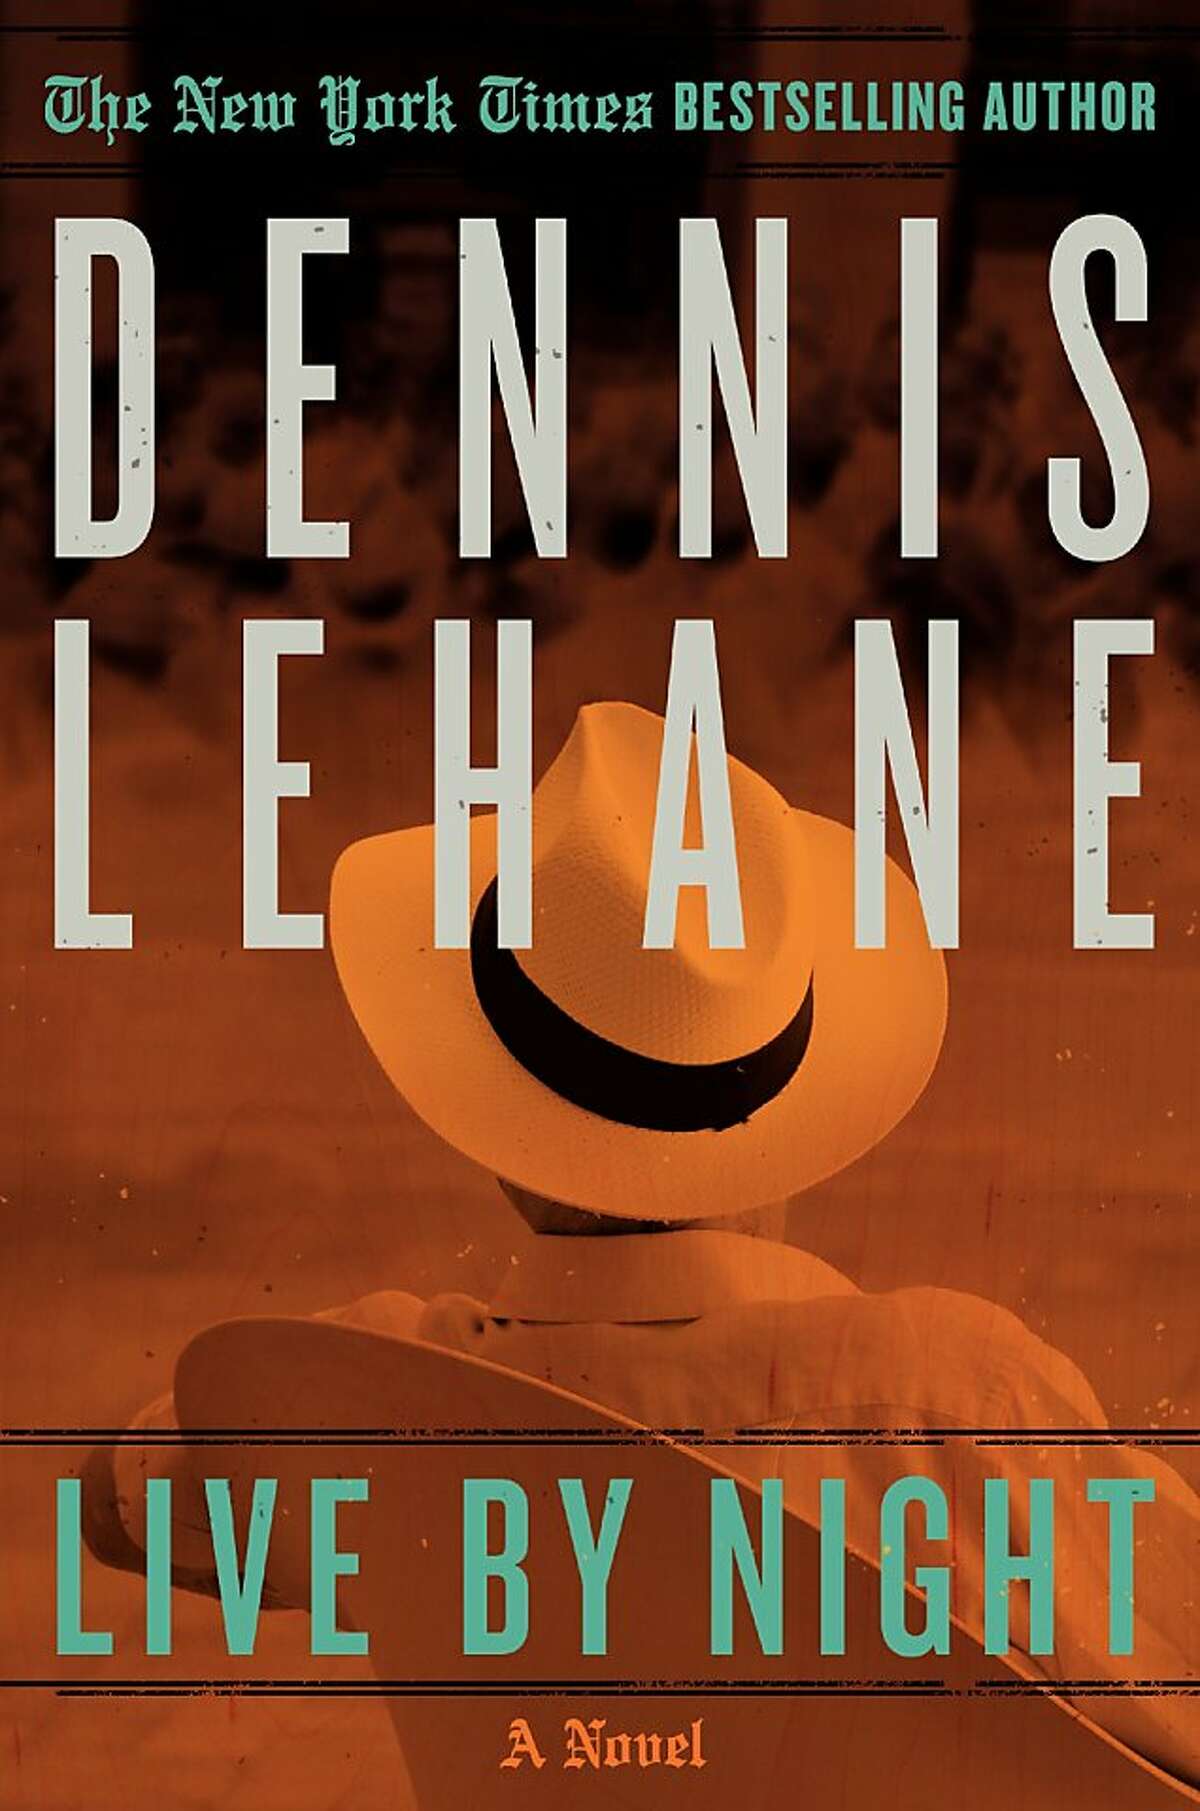 Live by Night, by Dennis Lehane